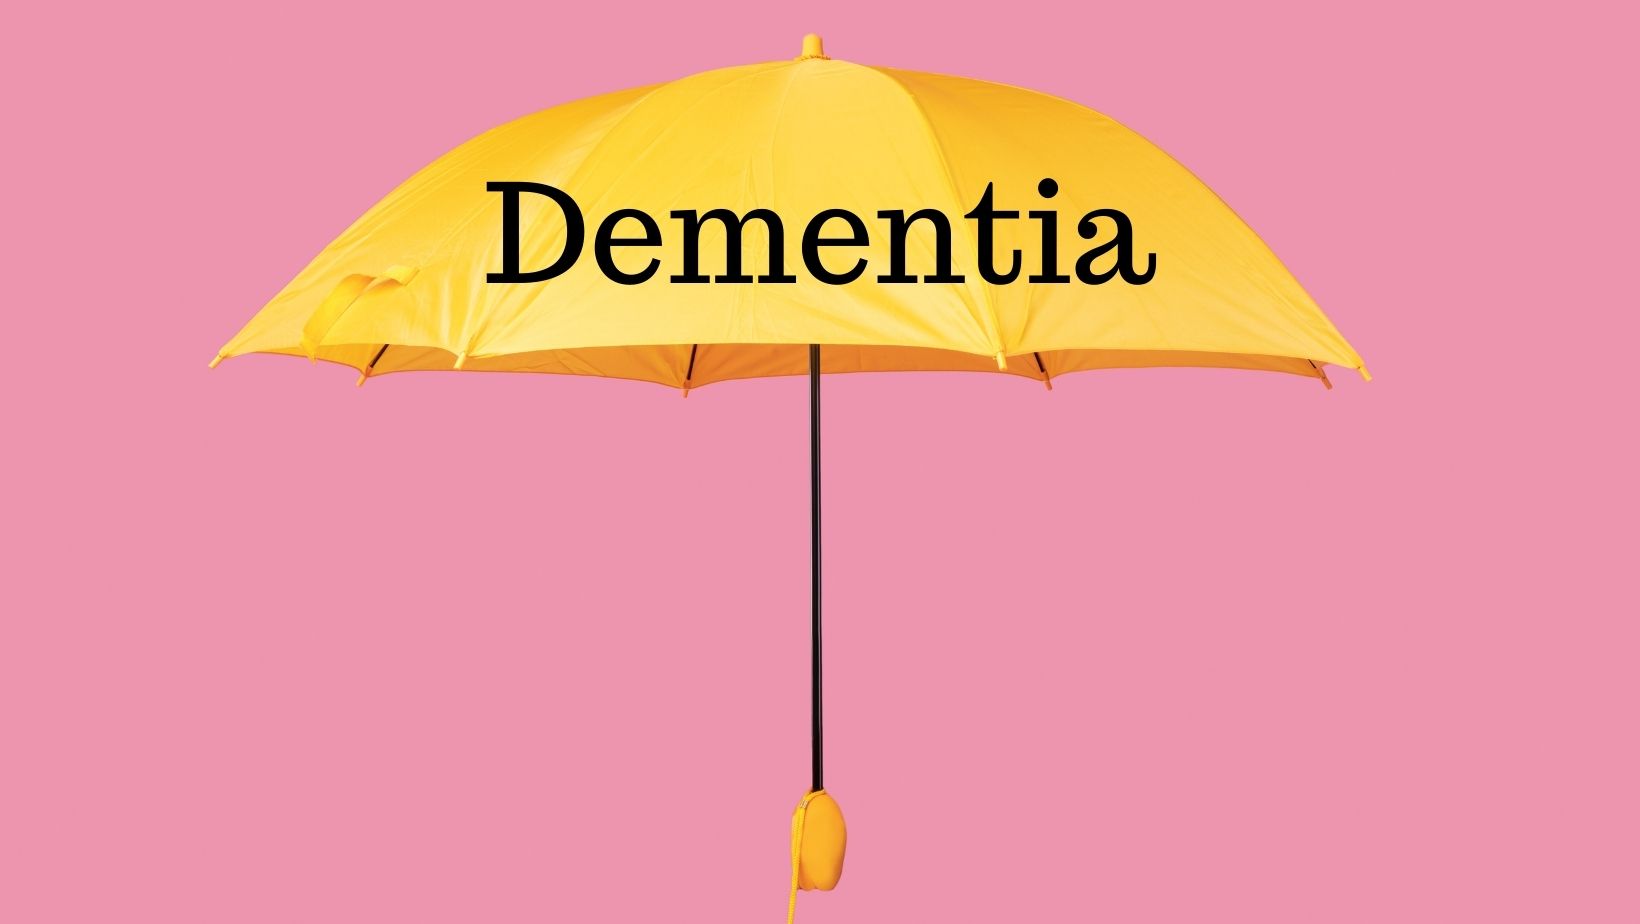 How Many Types of Dementia Are There?